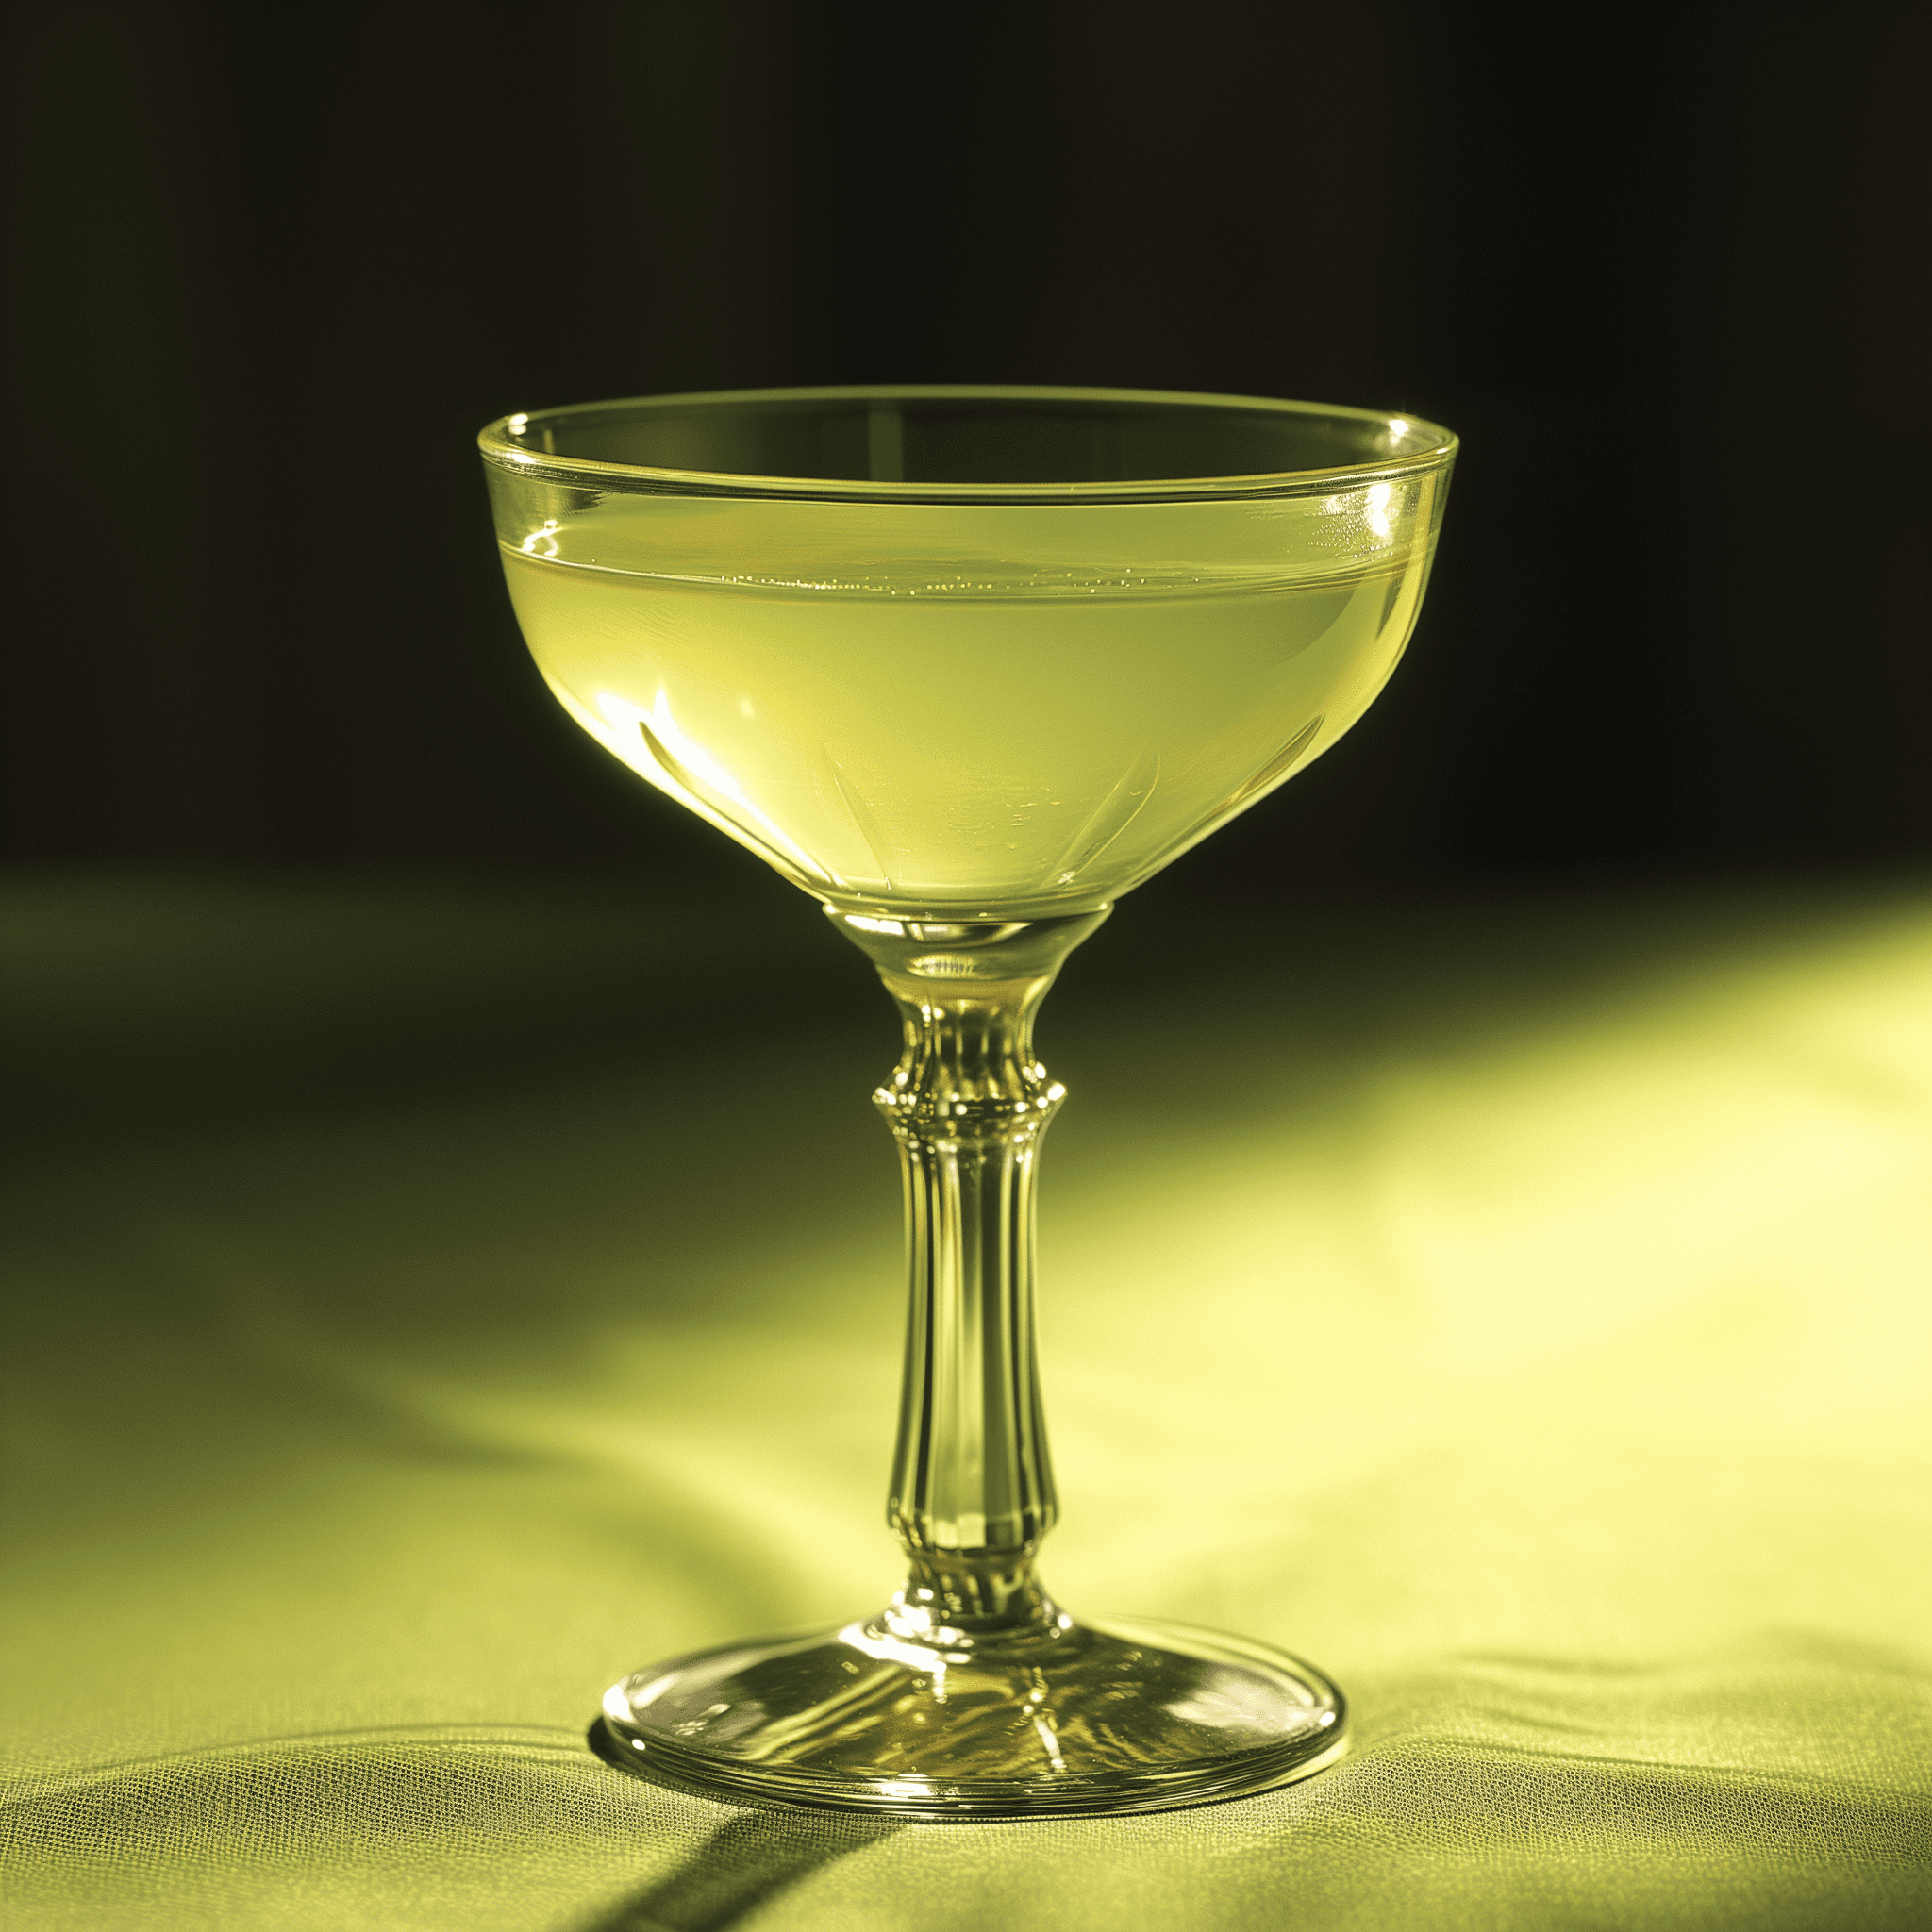 The Joy Division Cocktail Recipe - The Joy Division is a bold cocktail with a striking balance of botanicals from the gin, the herbal complexity of absinthe, and the sweet citrus kick from Cointreau. It's dry, slightly bitter, with a smooth finish.